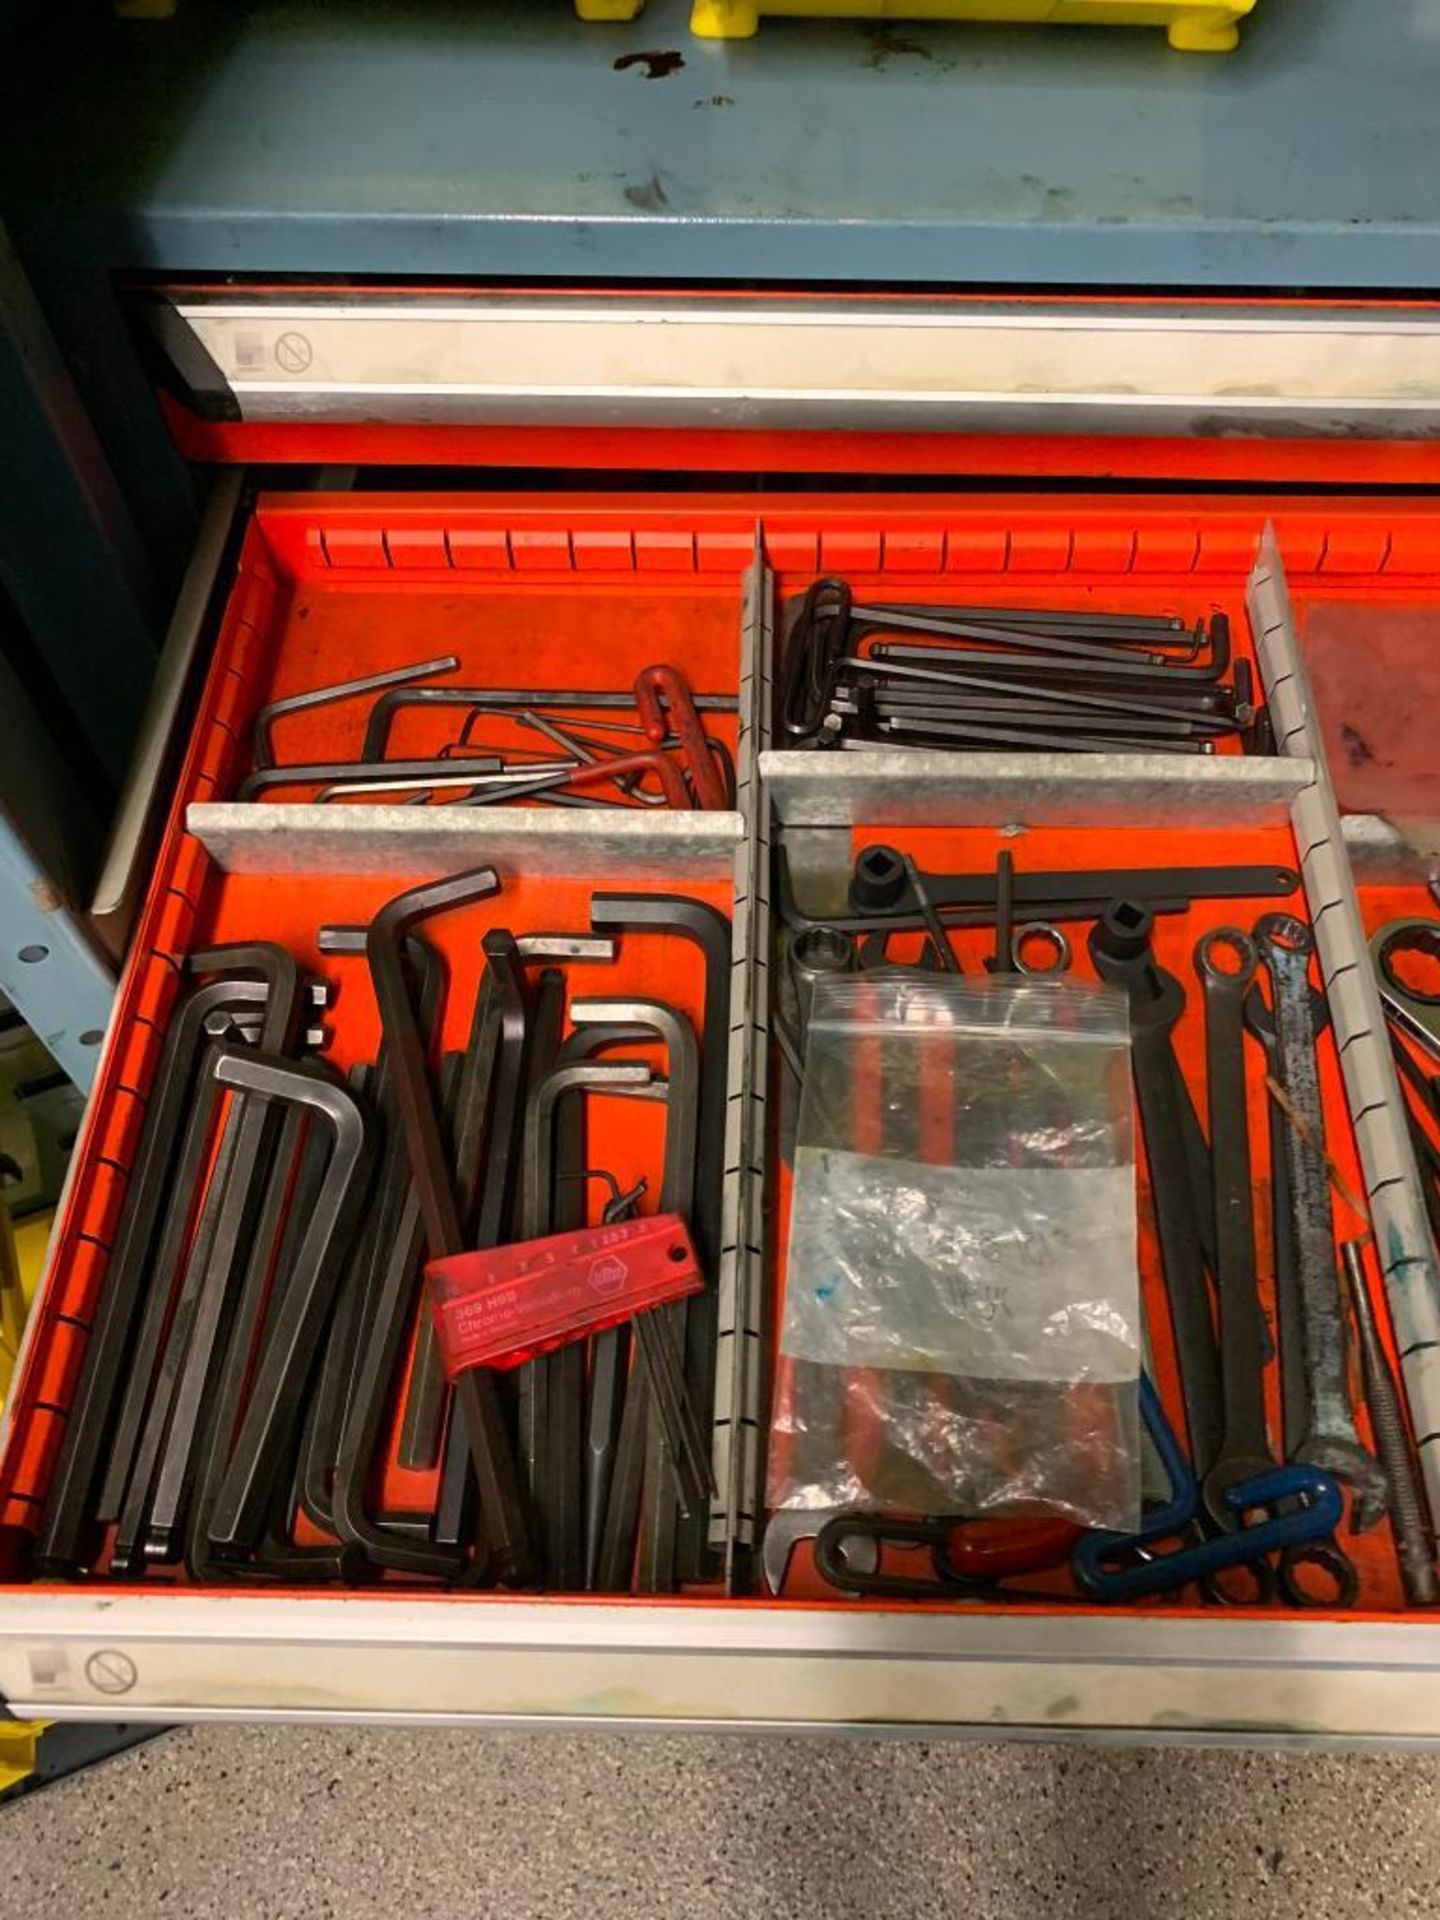 (4) 2-Door Cabinets w/ Content of Assorted Hardware, Tools, Hard Hats, Empty Tool Cases - Image 53 of 56